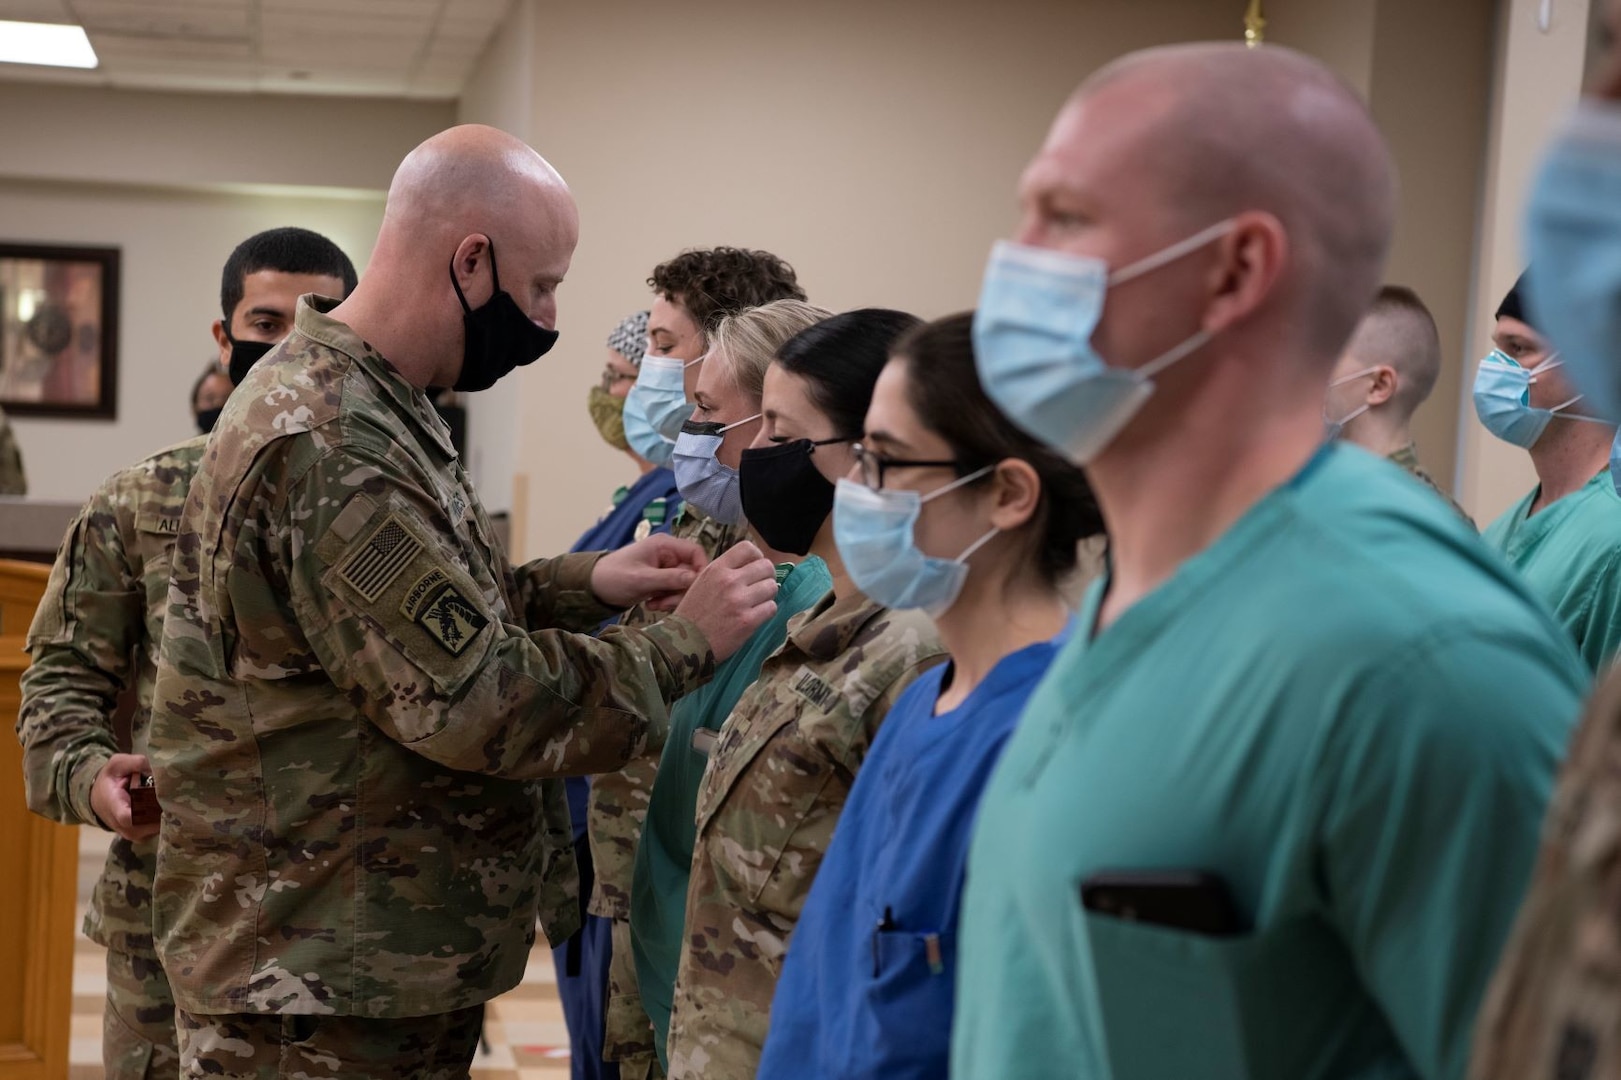 A military commander pins an award on a Soldier in a medical center.